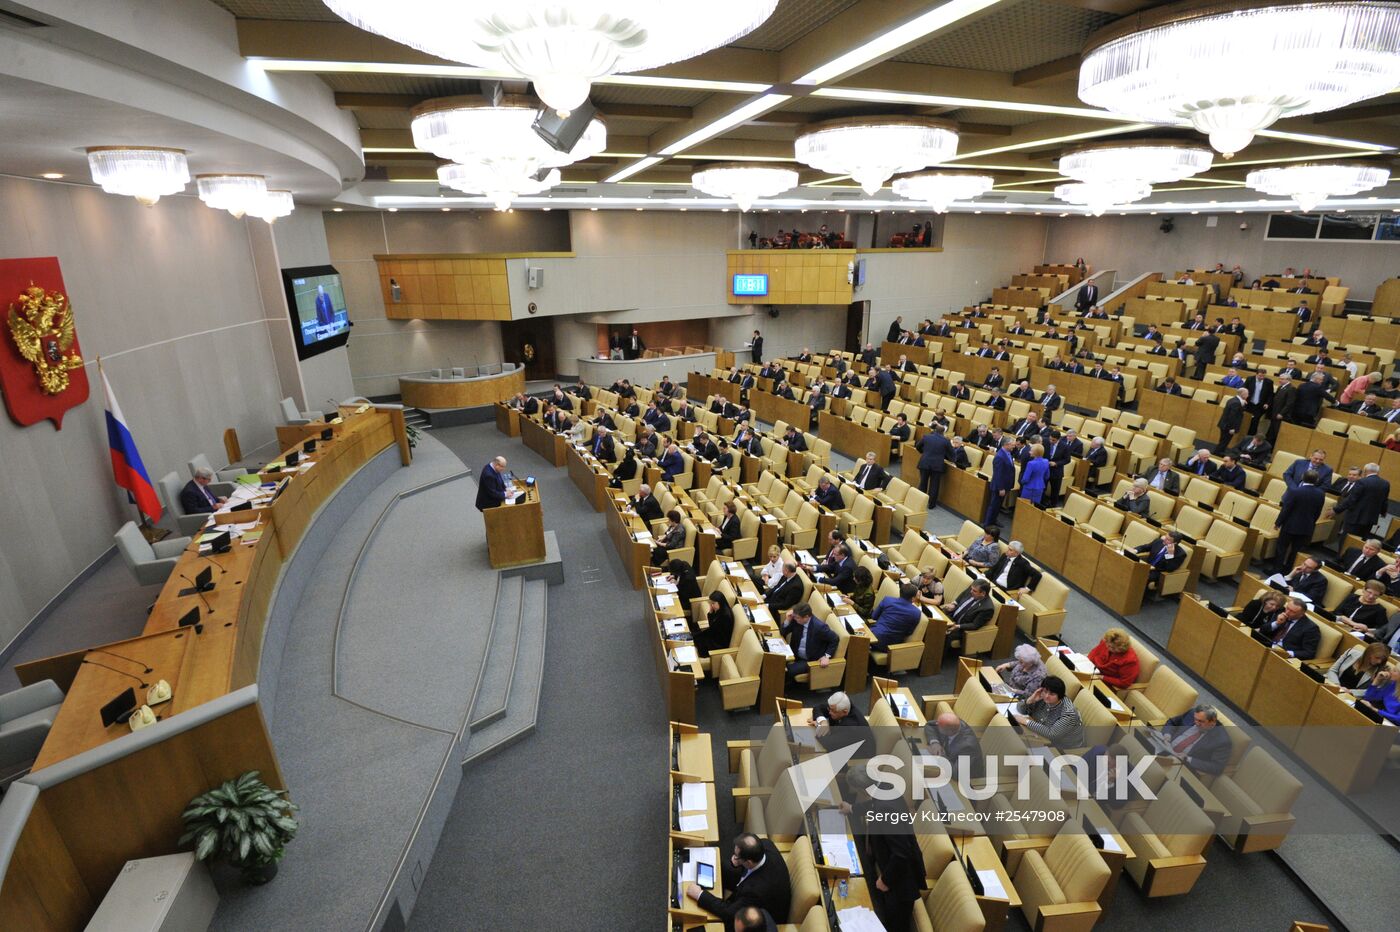 Last plenary meeting of the State Duma of the Russian Federation in 2014